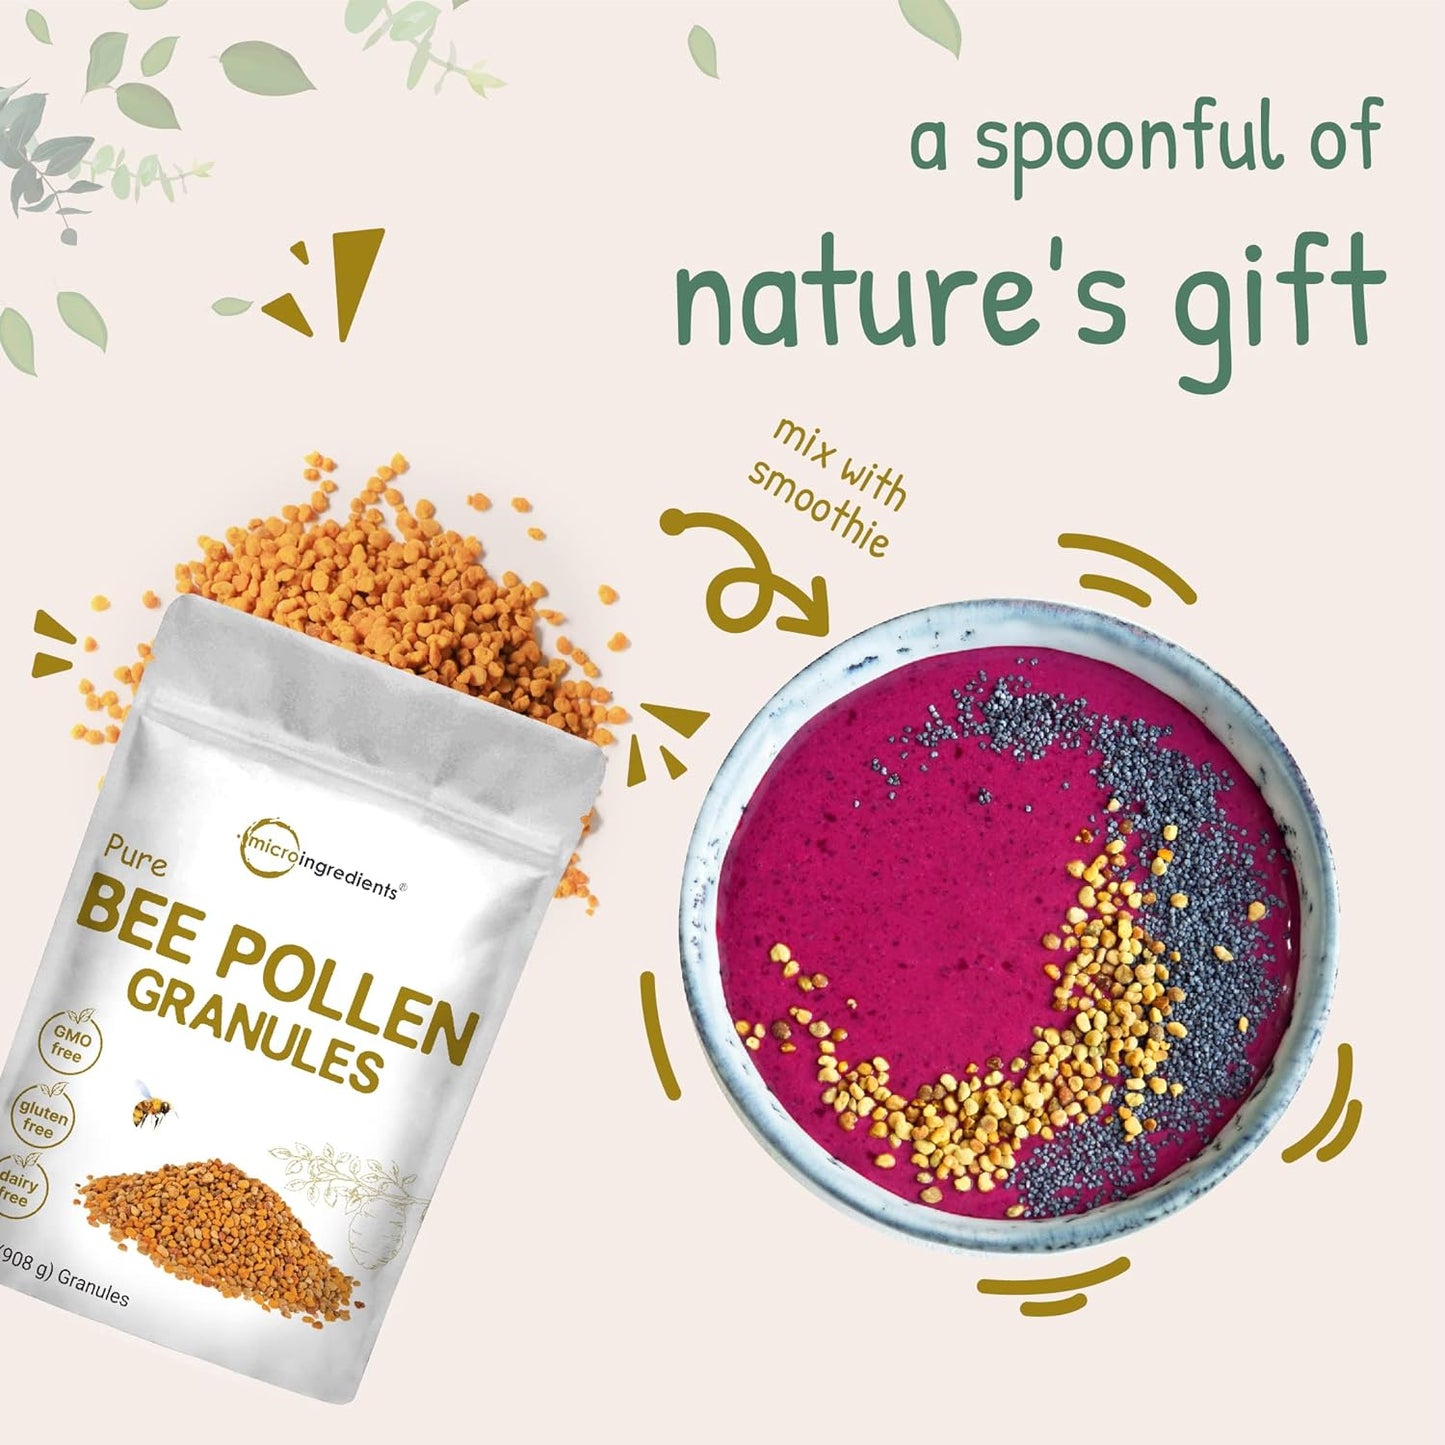 Pure Bee Pollen Granules, 2Lbs | Fresh Harvest, Natural Superfood, Raw Sweet Flavor | Rich in B Vitamins, Minerals, Protein, & Antioxidants | Keto, Non-Gmo